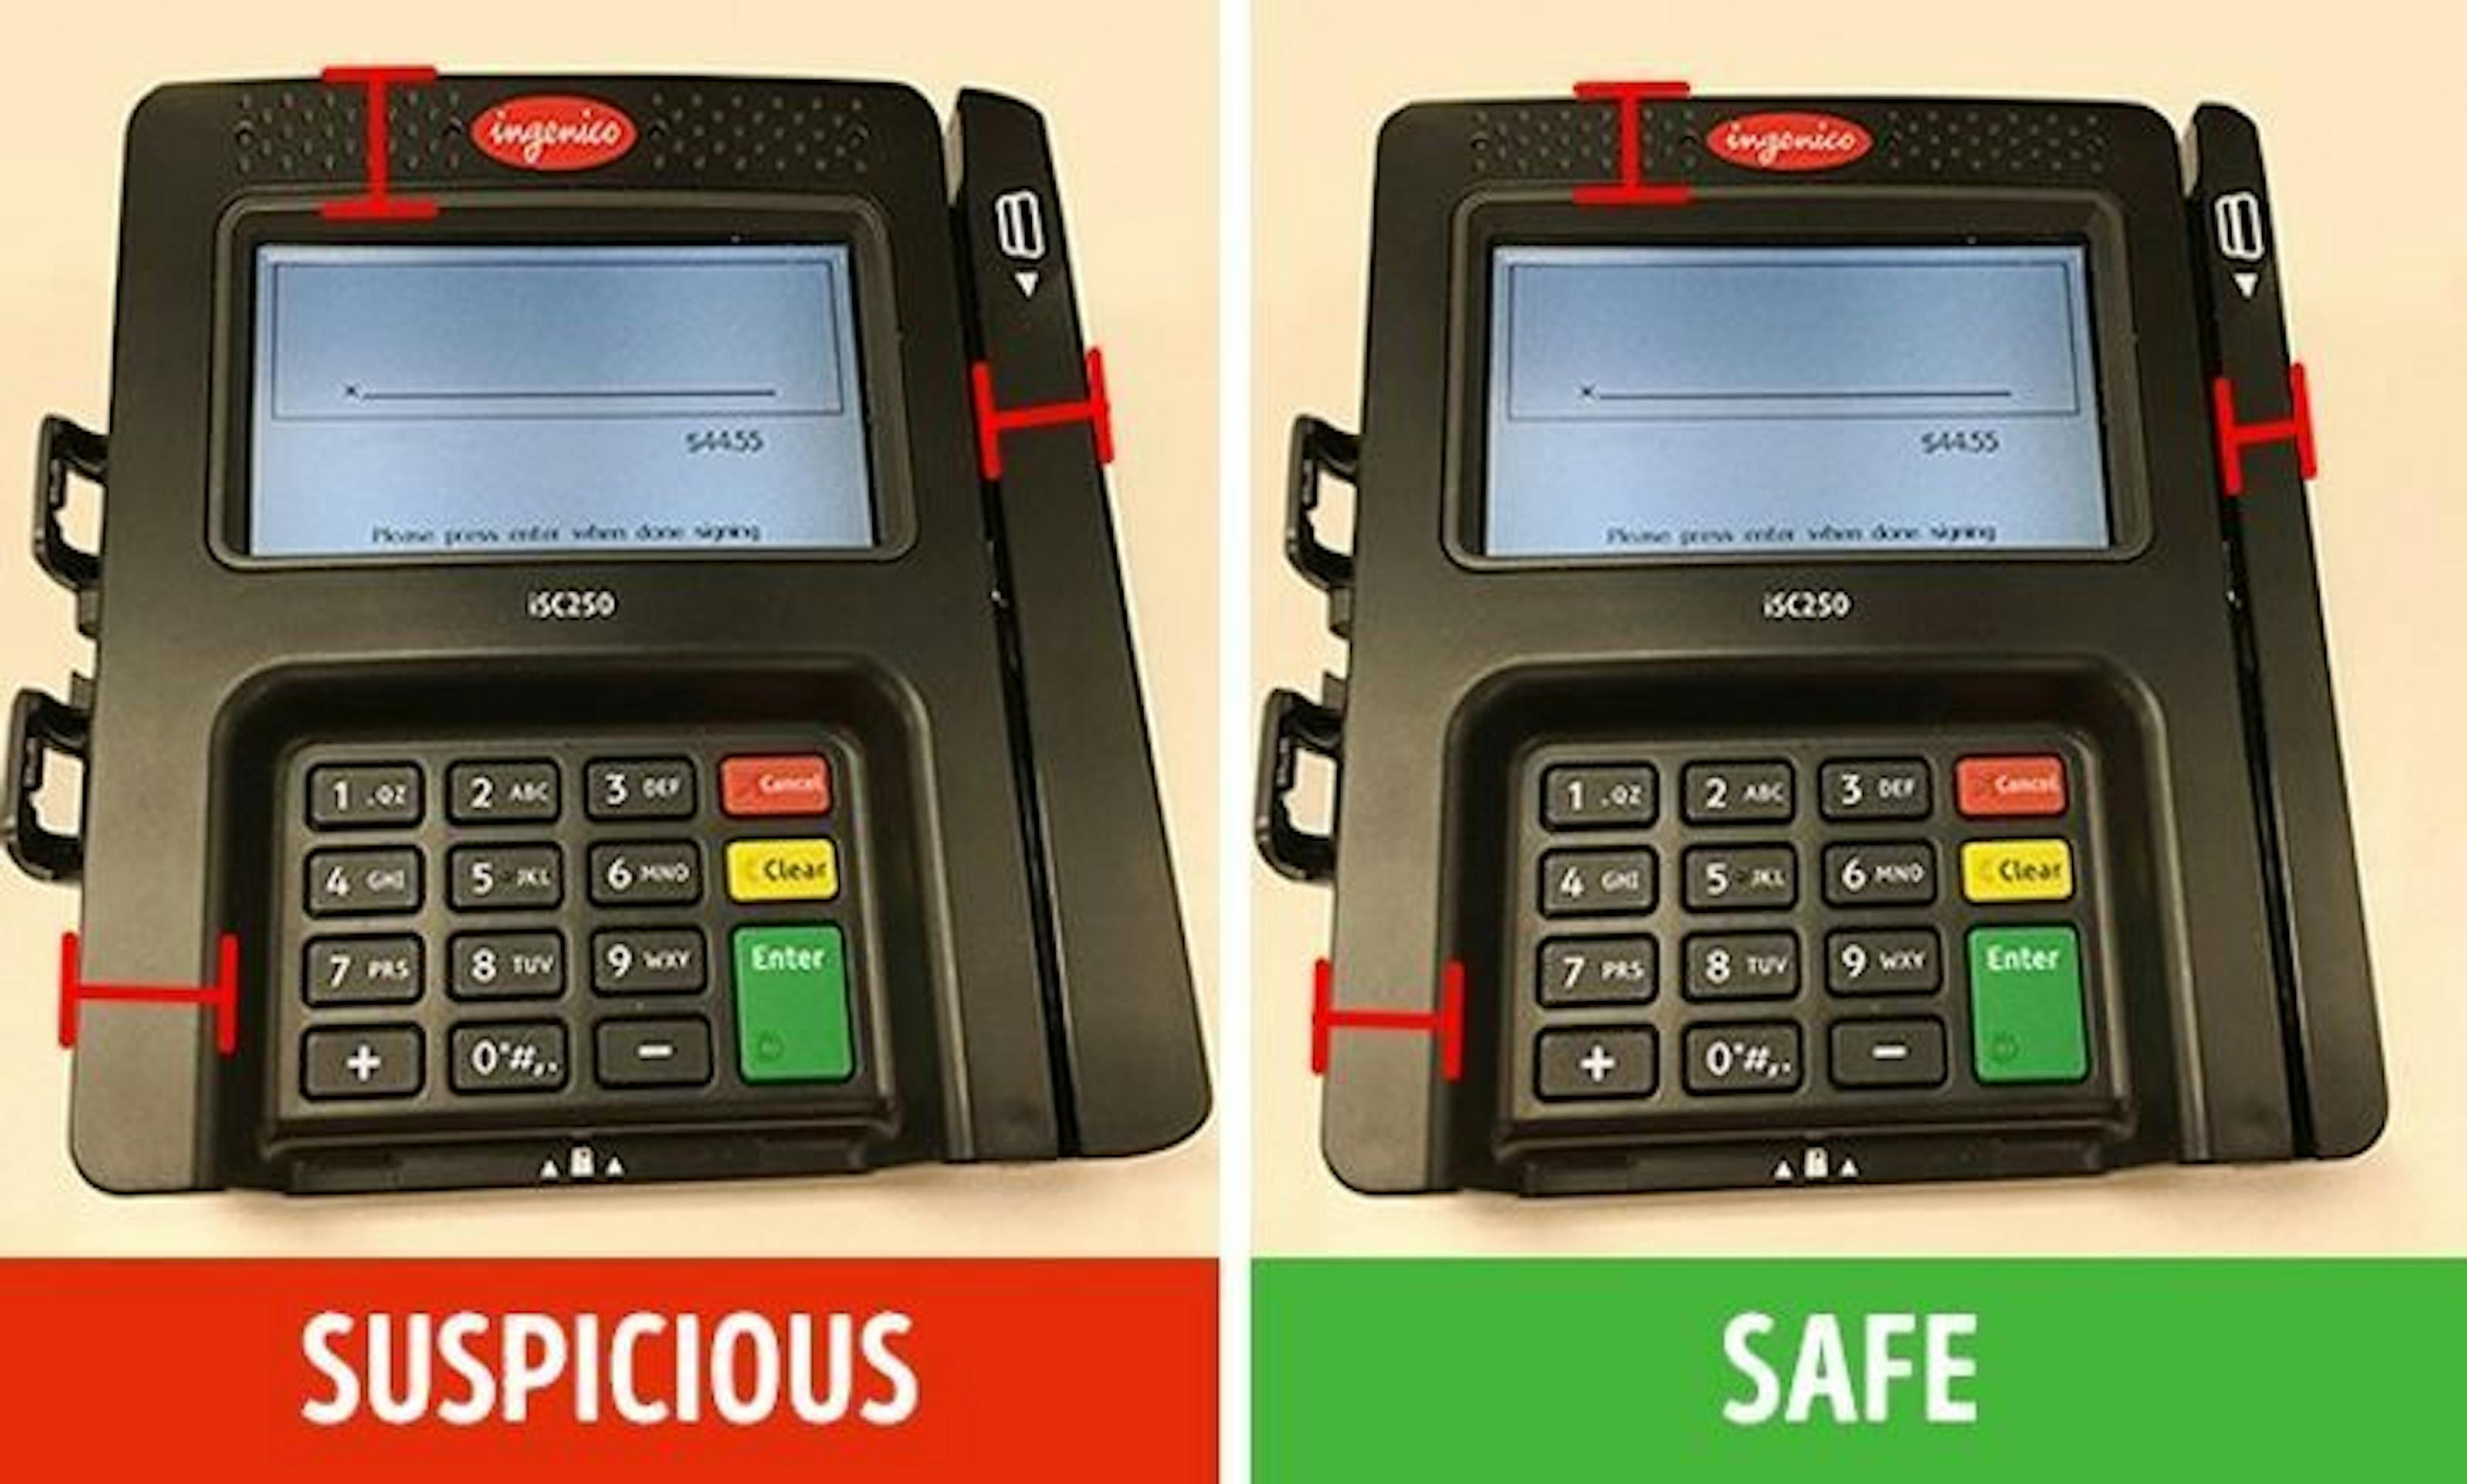 /how-to-avoid-credit-card-skimming-5-tips-to-keep-your-information-safe feature image